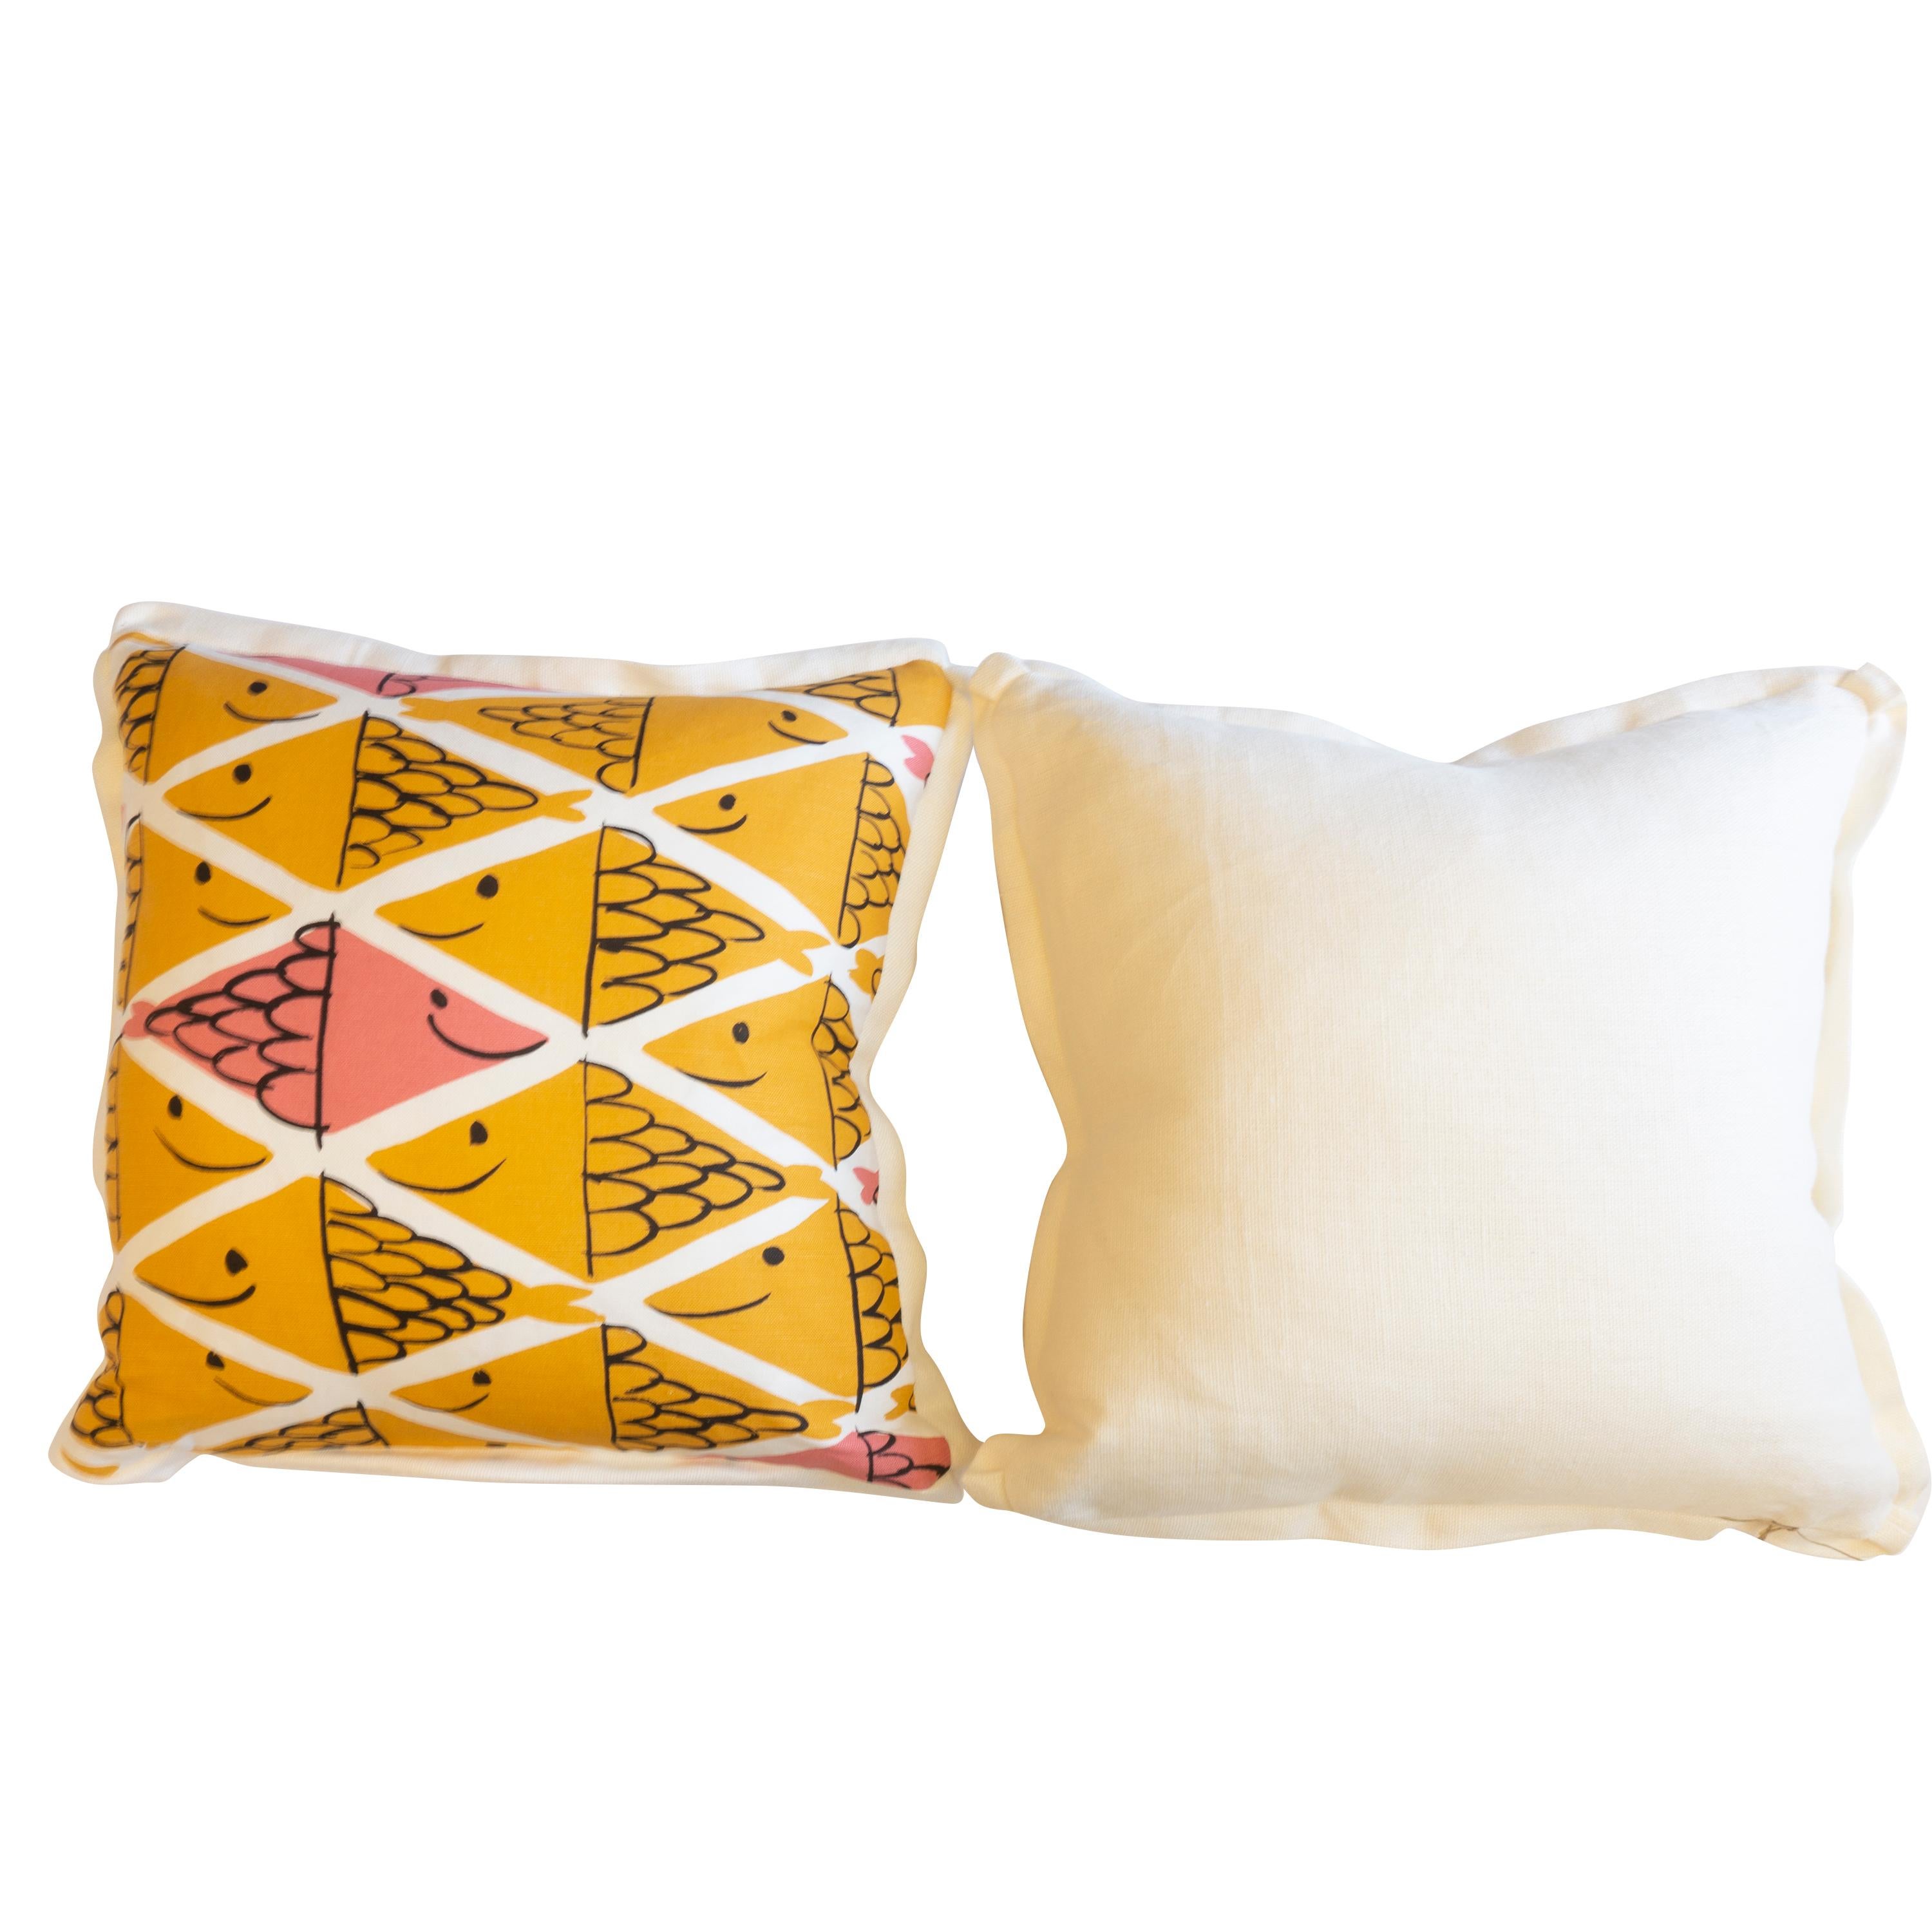 Contemporary Throw Pillows with Smiling School of Fish Pattern